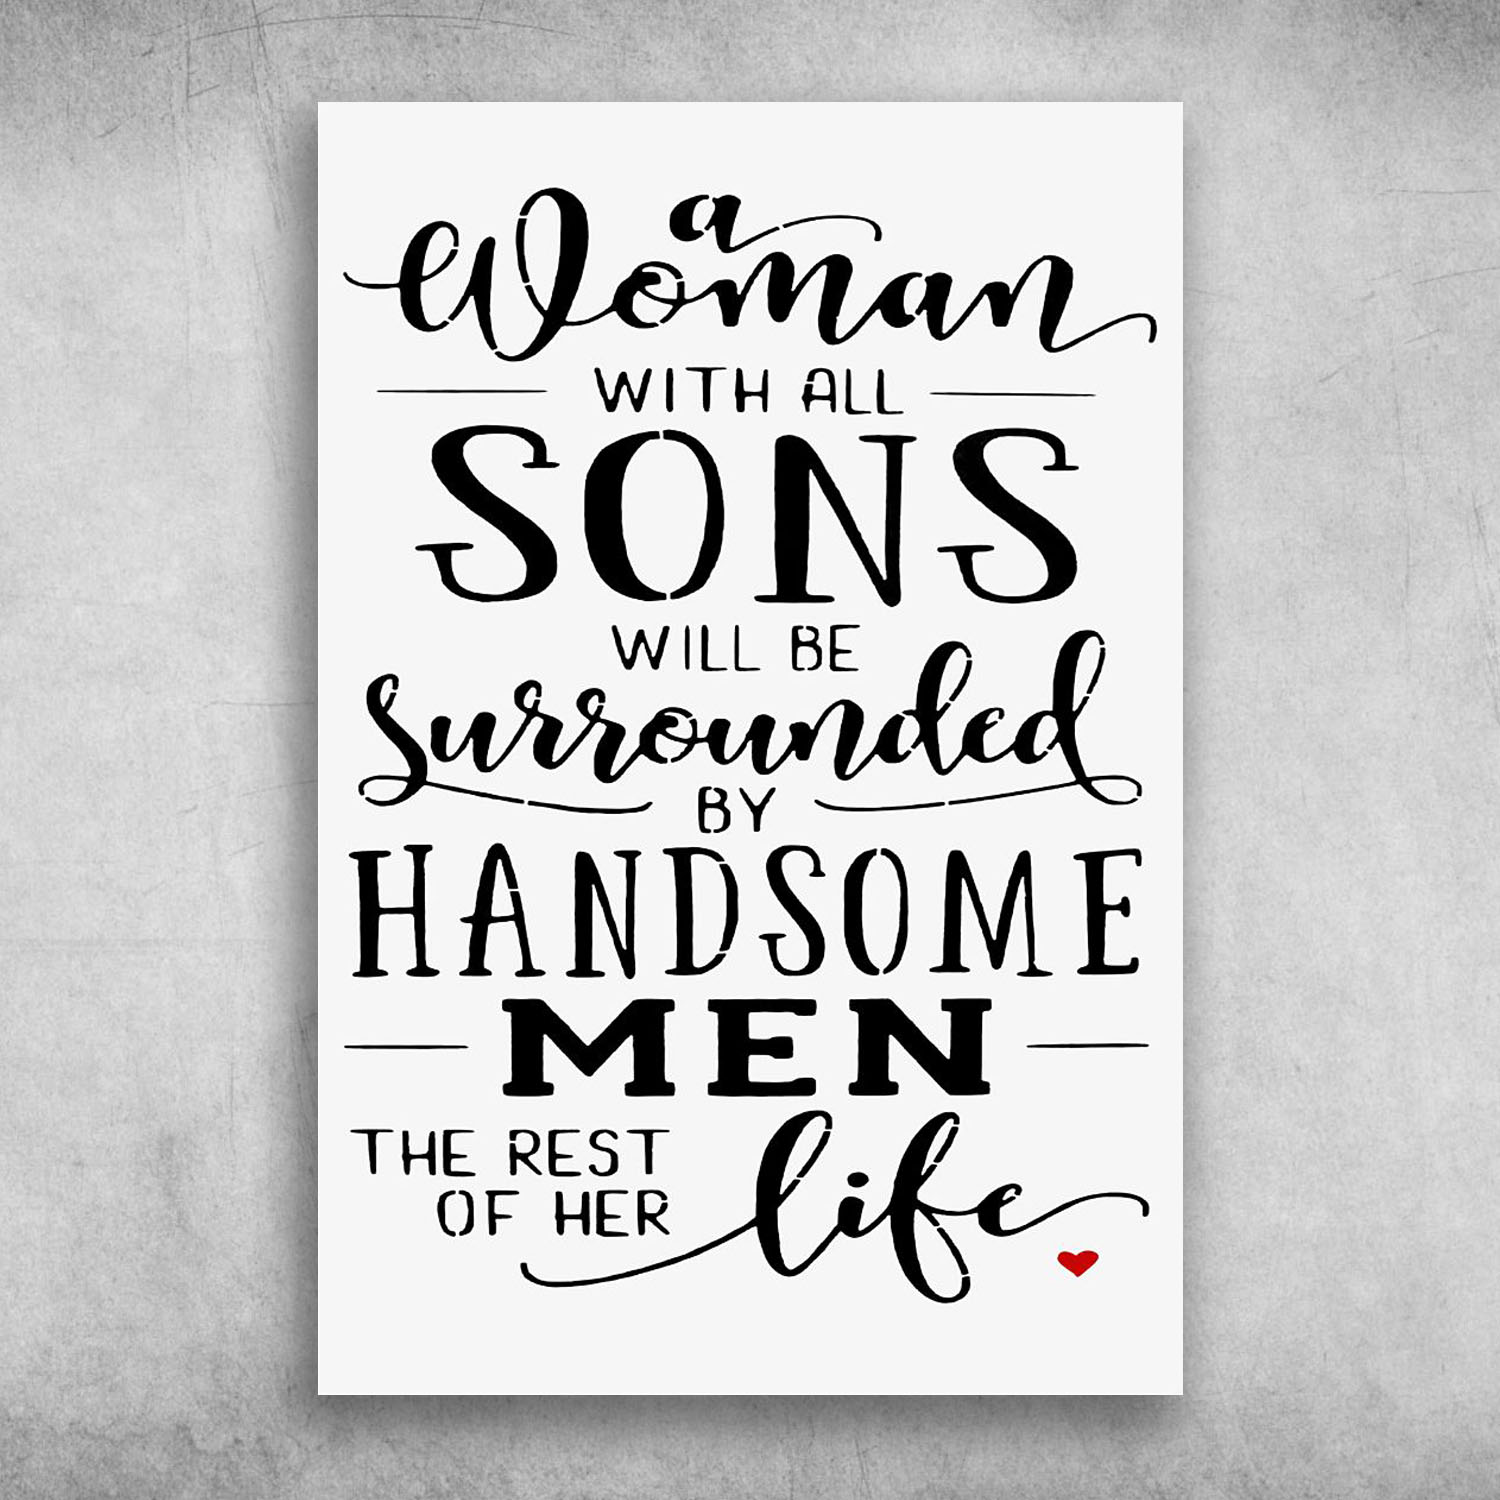 A Woman With All Sons Will Be Surrounded By Handsome Men